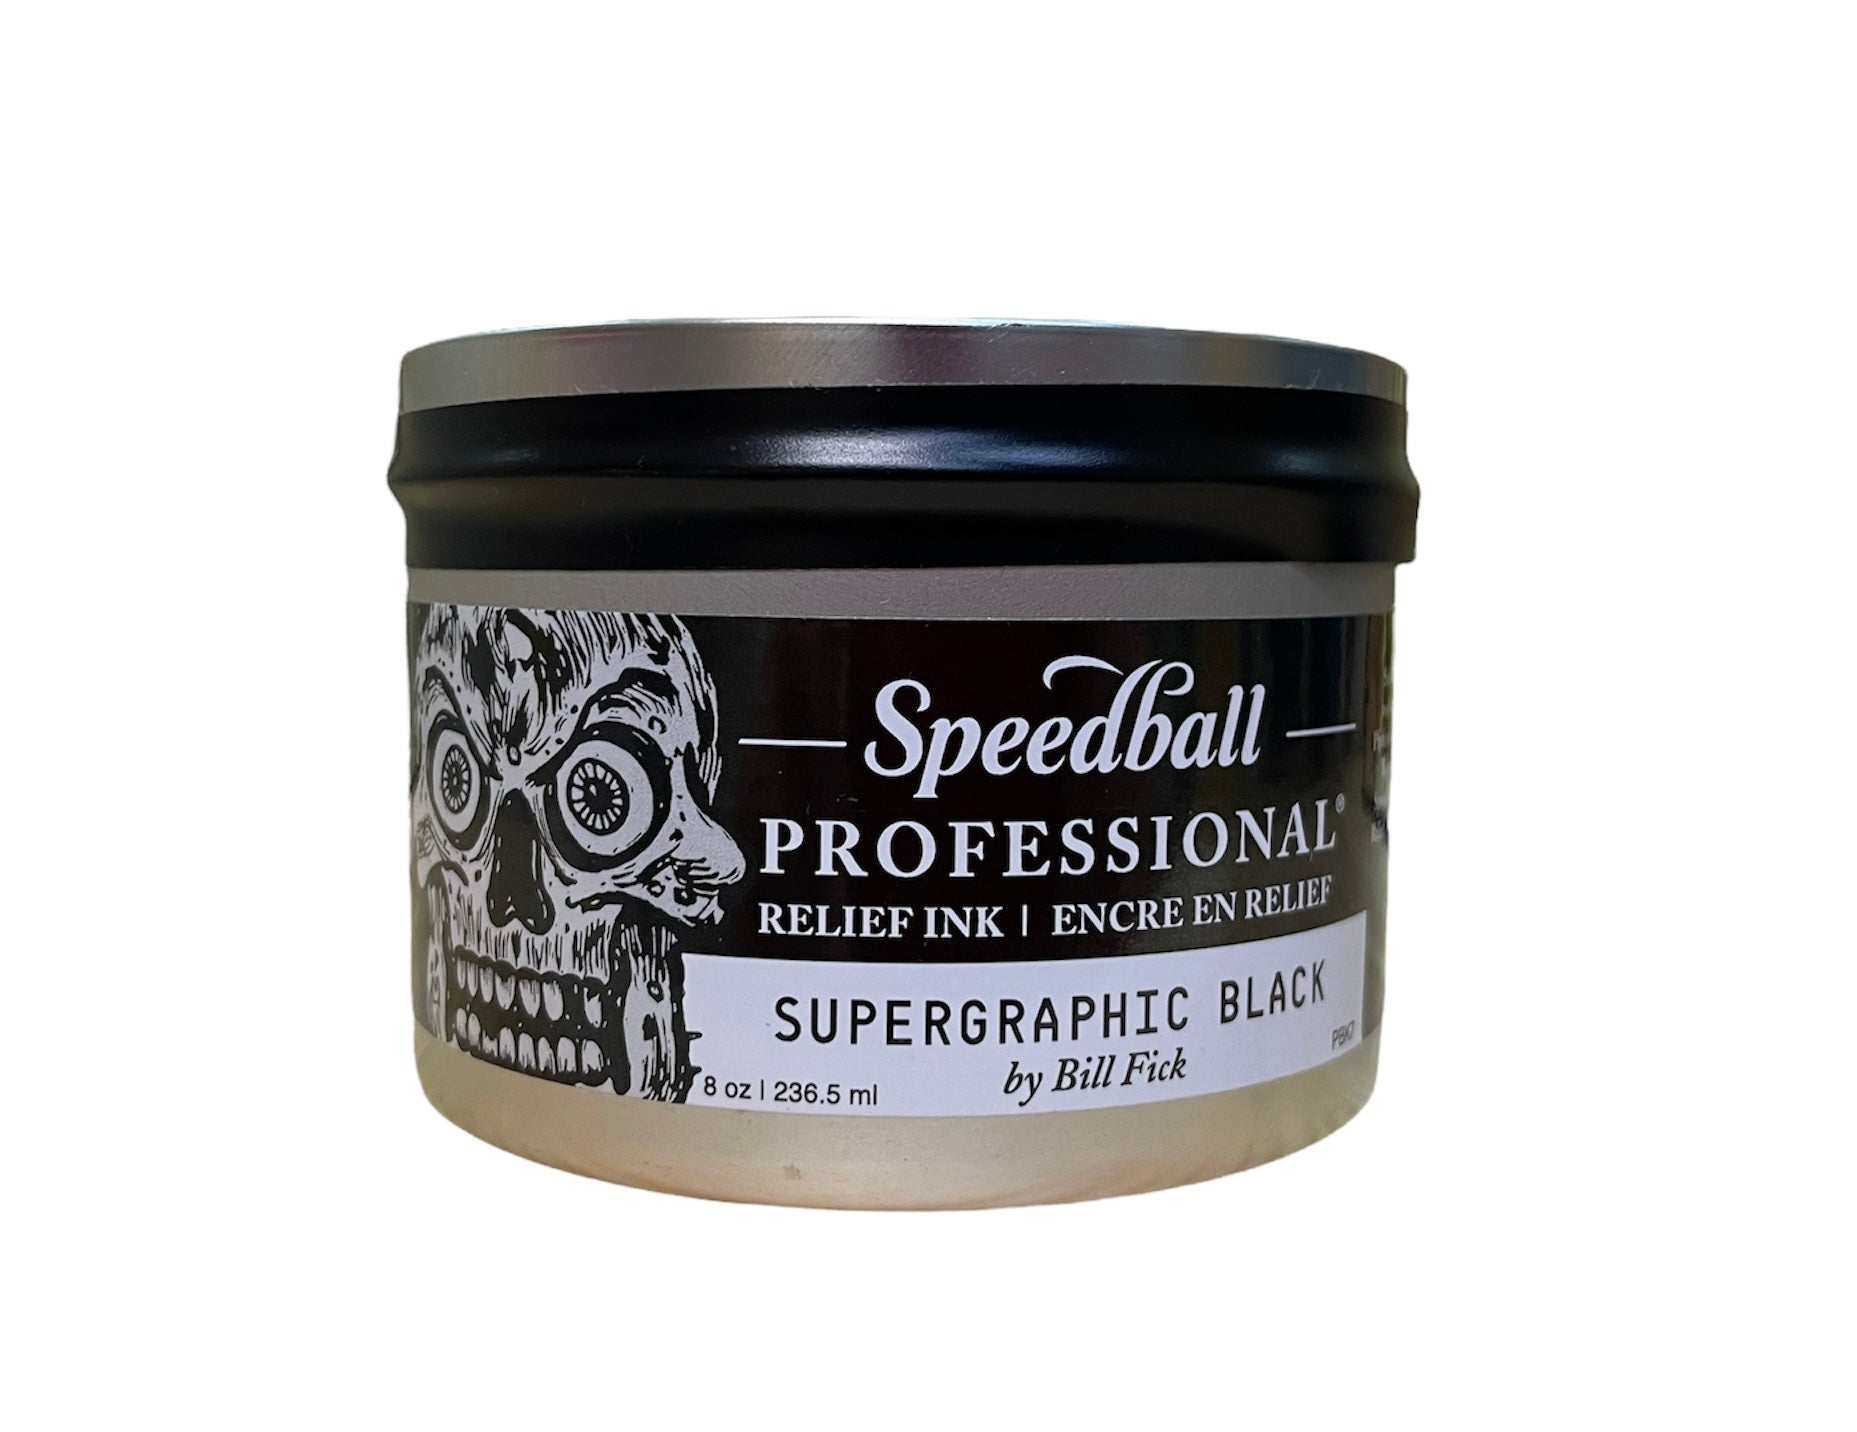 Speedball Professional Printmaking Relief Ink. Available in Singapore.